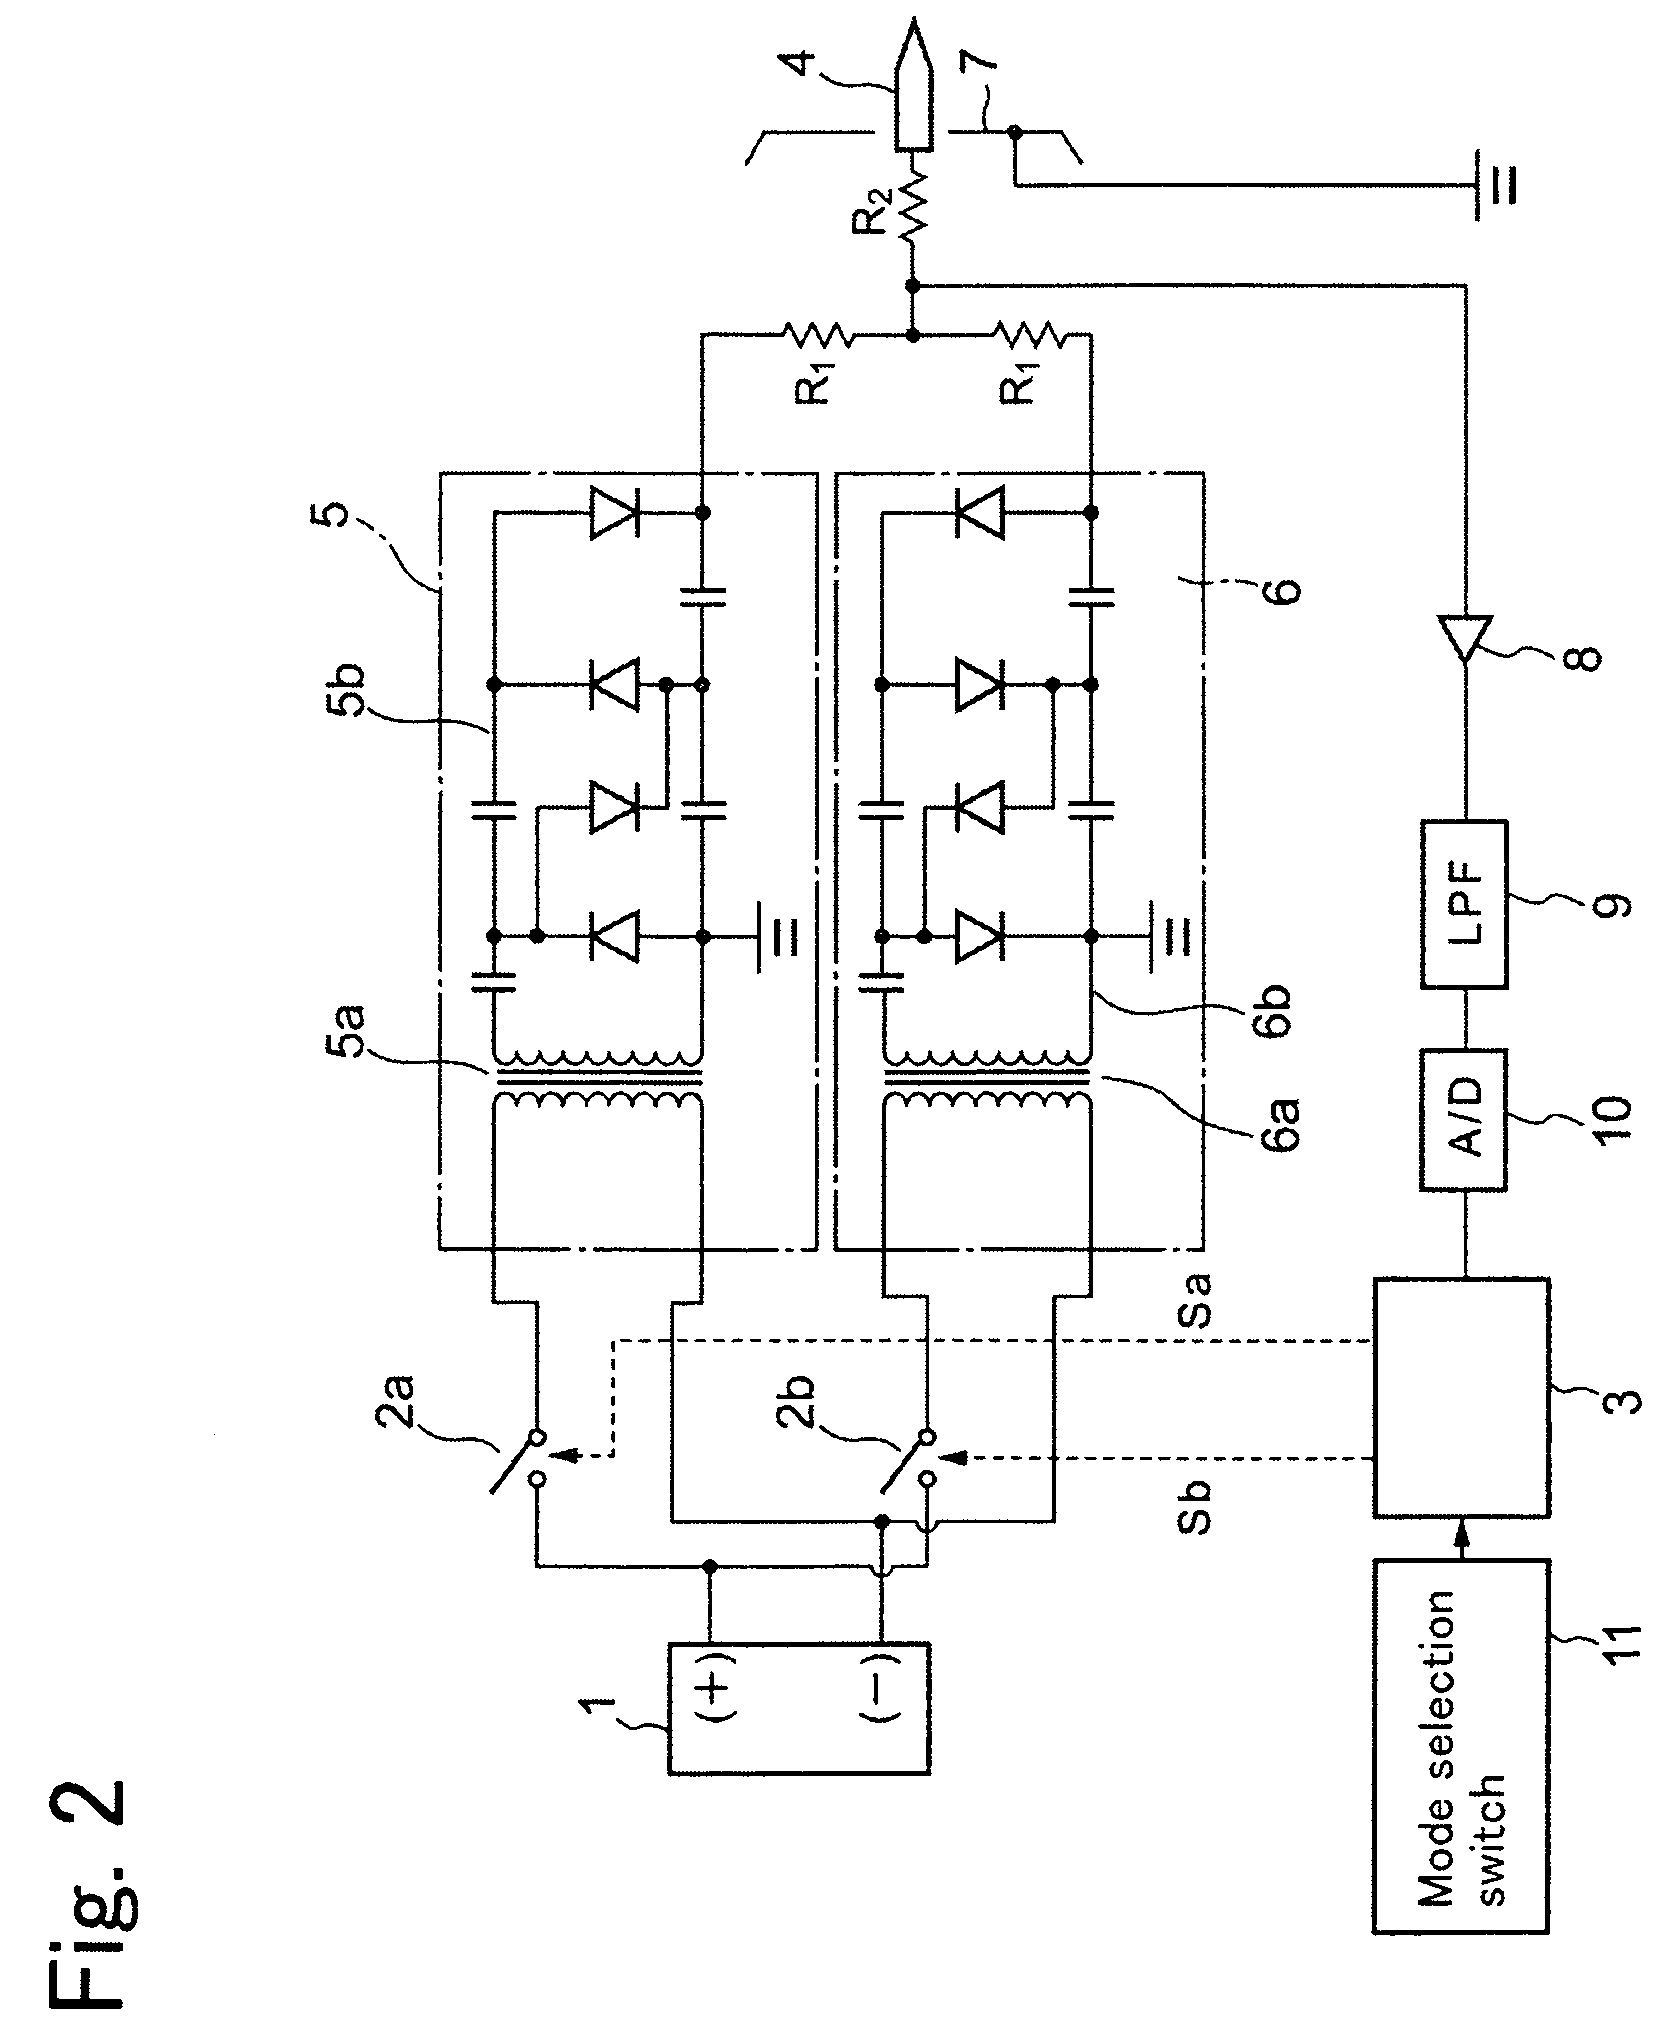 Electricity removal apparatus